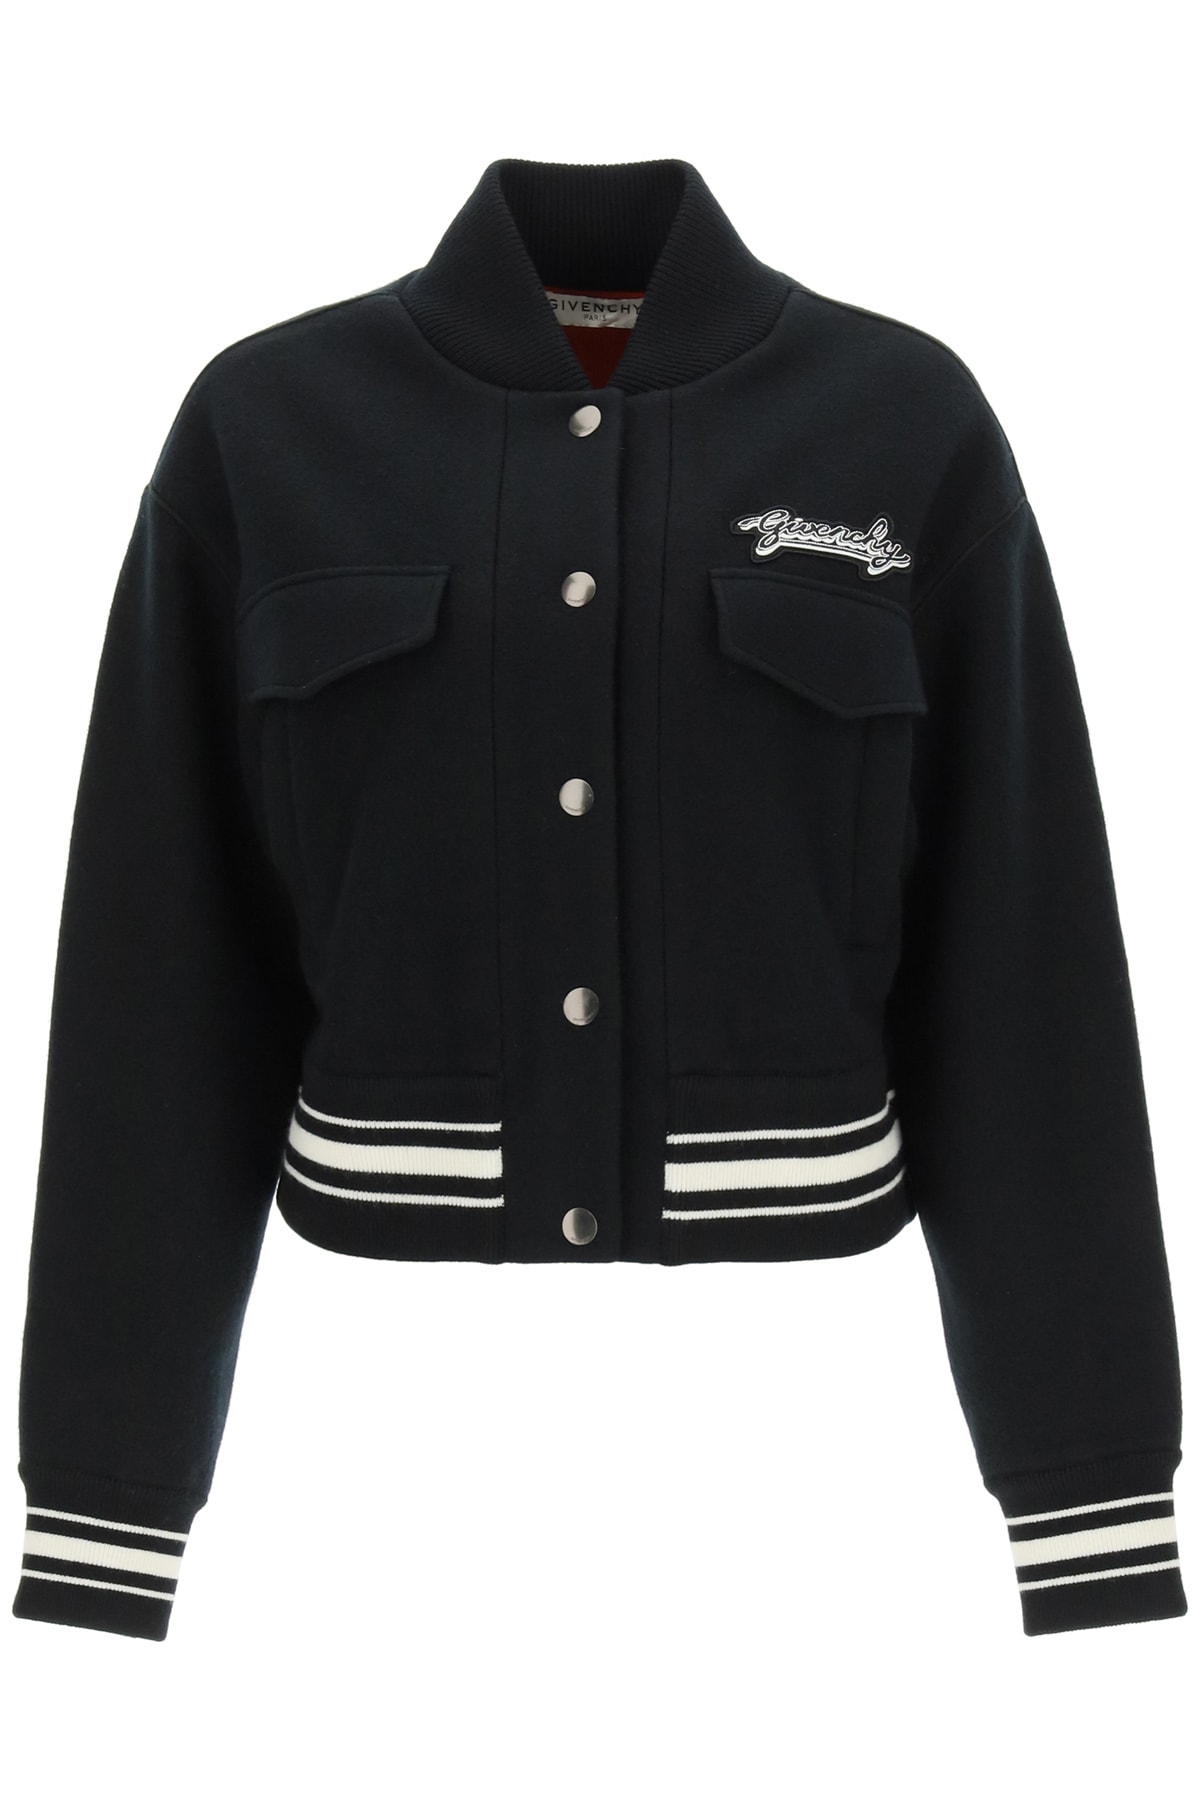 givenchy-bomber-jacket-with-logo-patch-coshio-online-shop